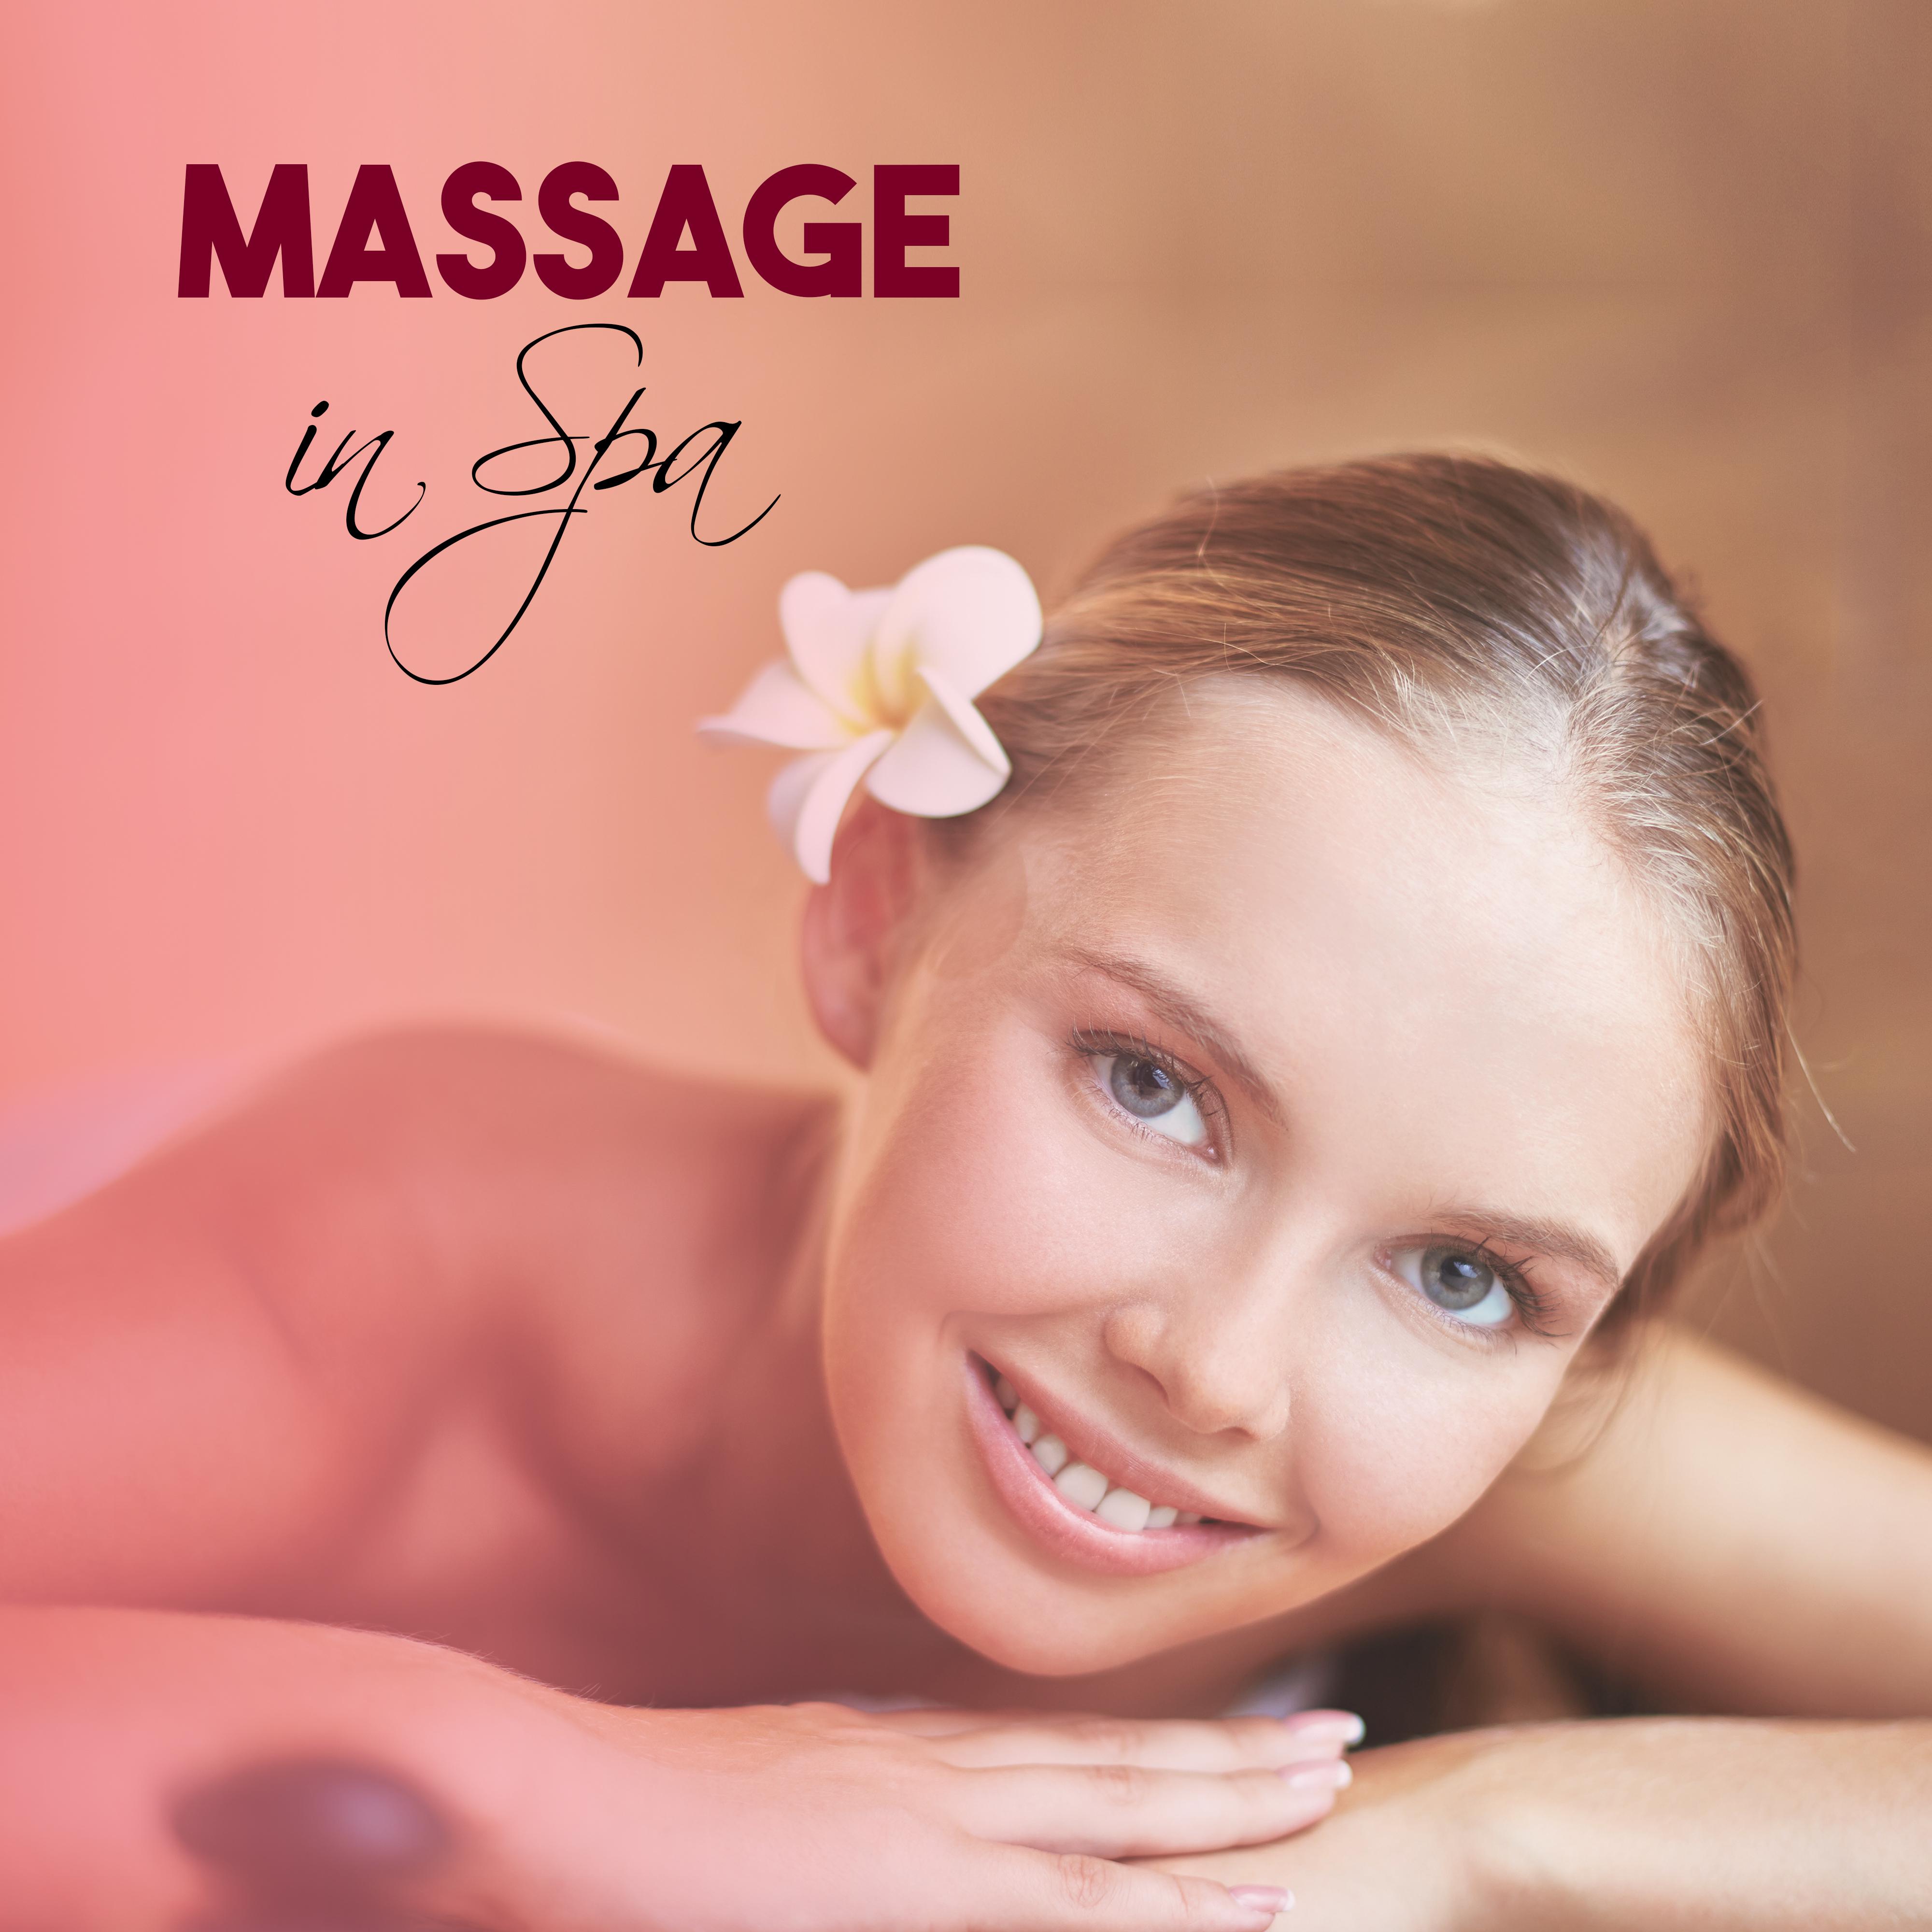 Massage in Spa – Relaxation Wellness, Deep Relief, Calming Sounds, Relax, Spa Music, Relaxing Therapy for Body, Stress Relief